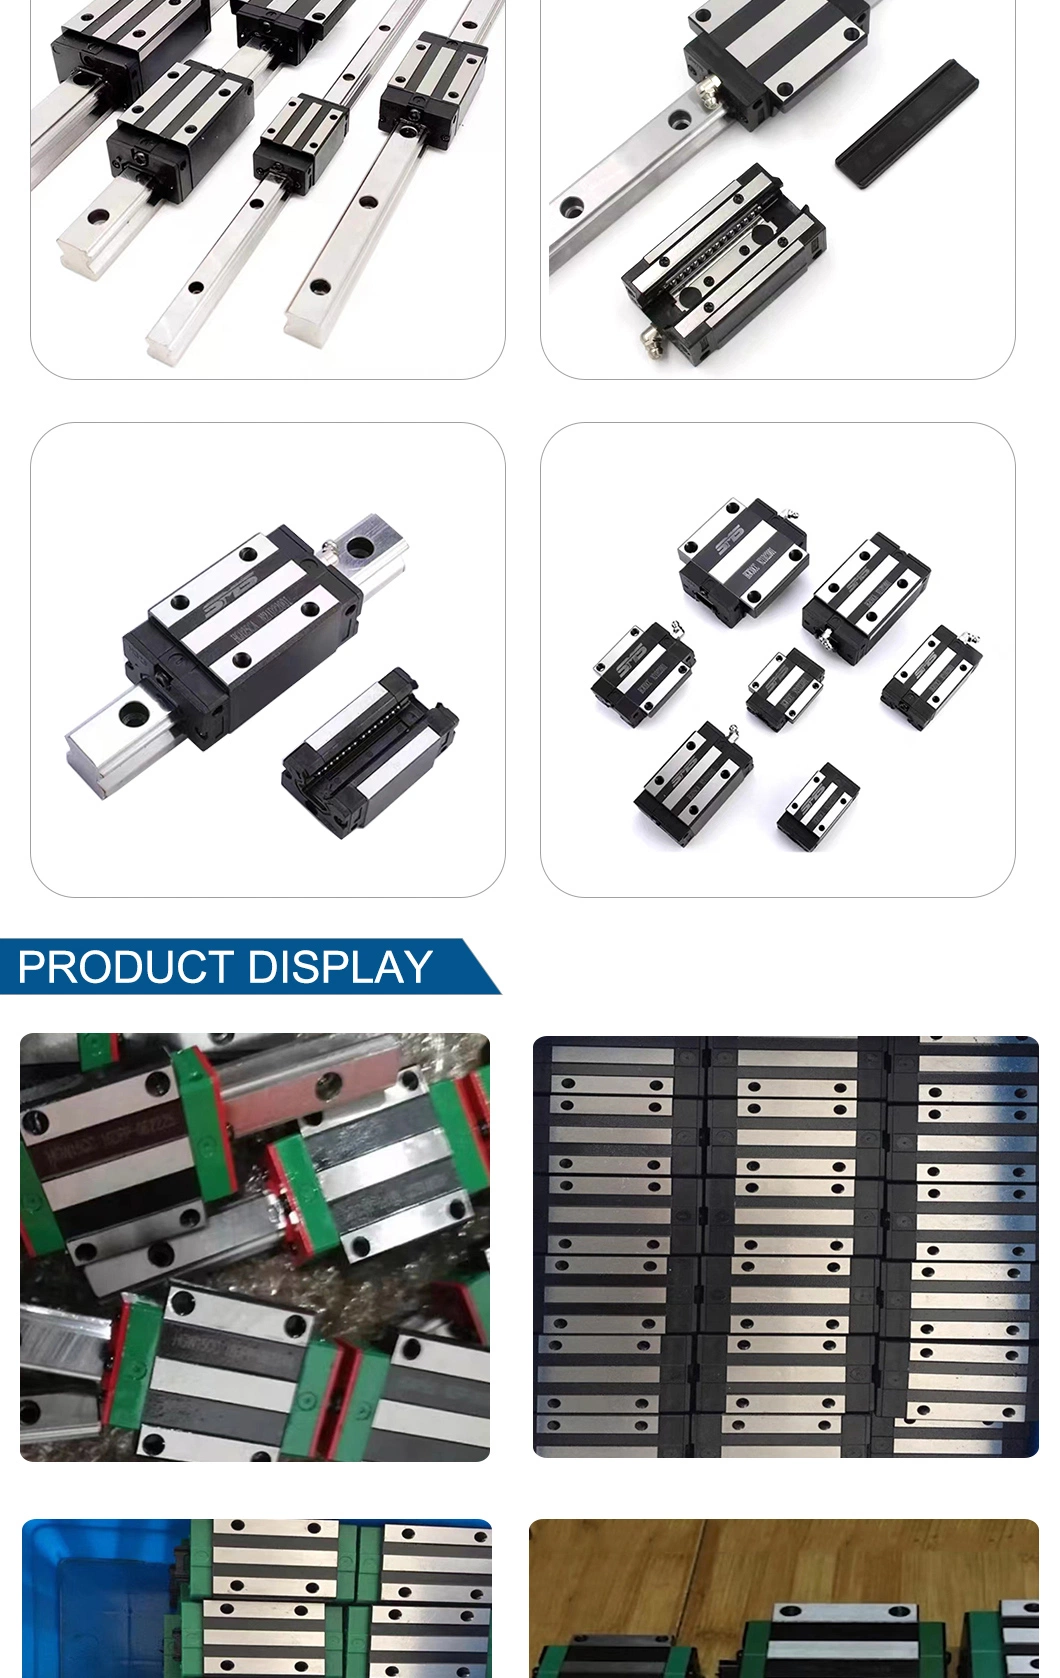 High Speed Belt Drive Linear Guide Rail Motion Guide for CNC Cutting Machine